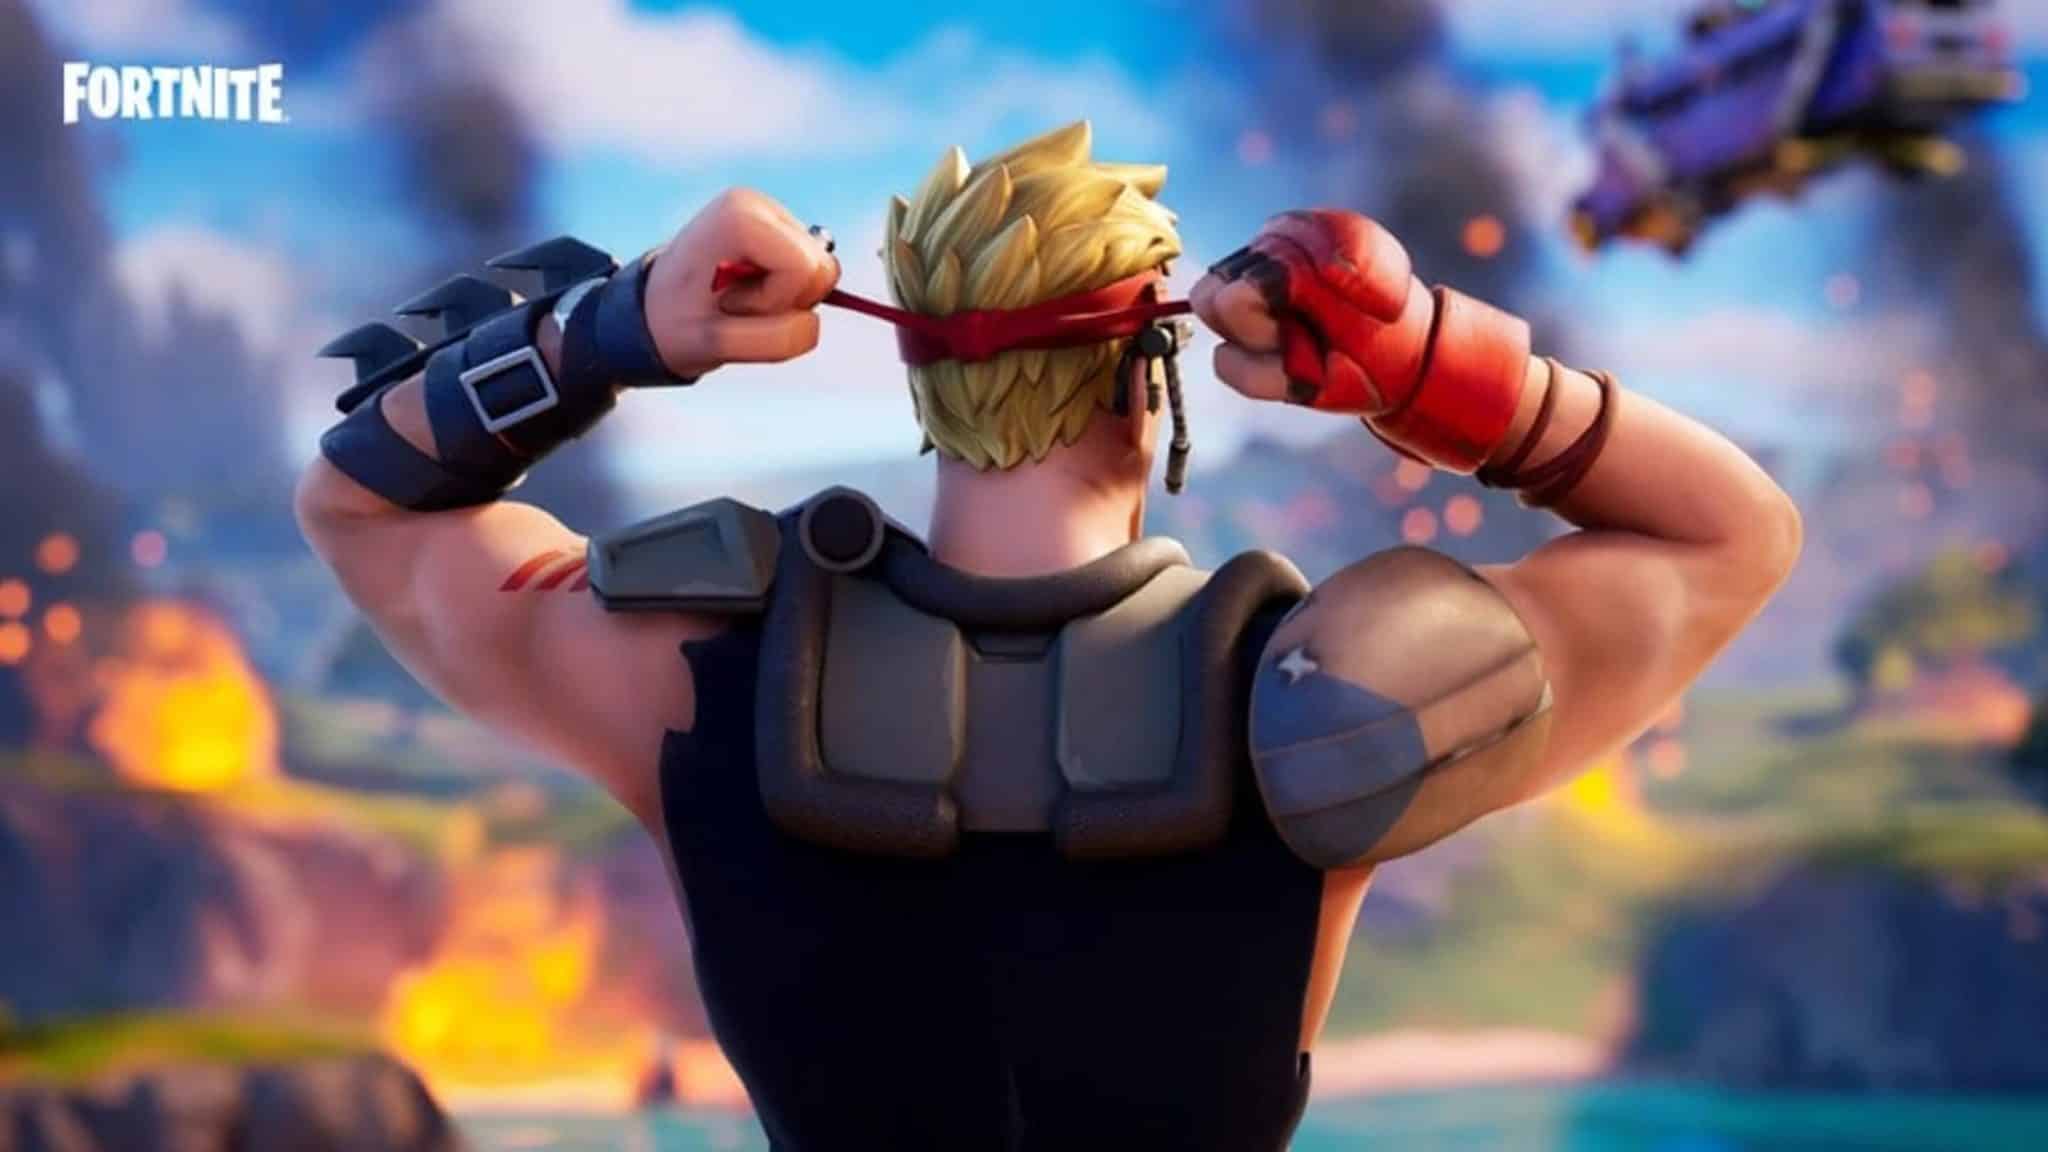 LEGO Fortnite teased in potential collaboration between LEGO & battle  royale game - Dexerto